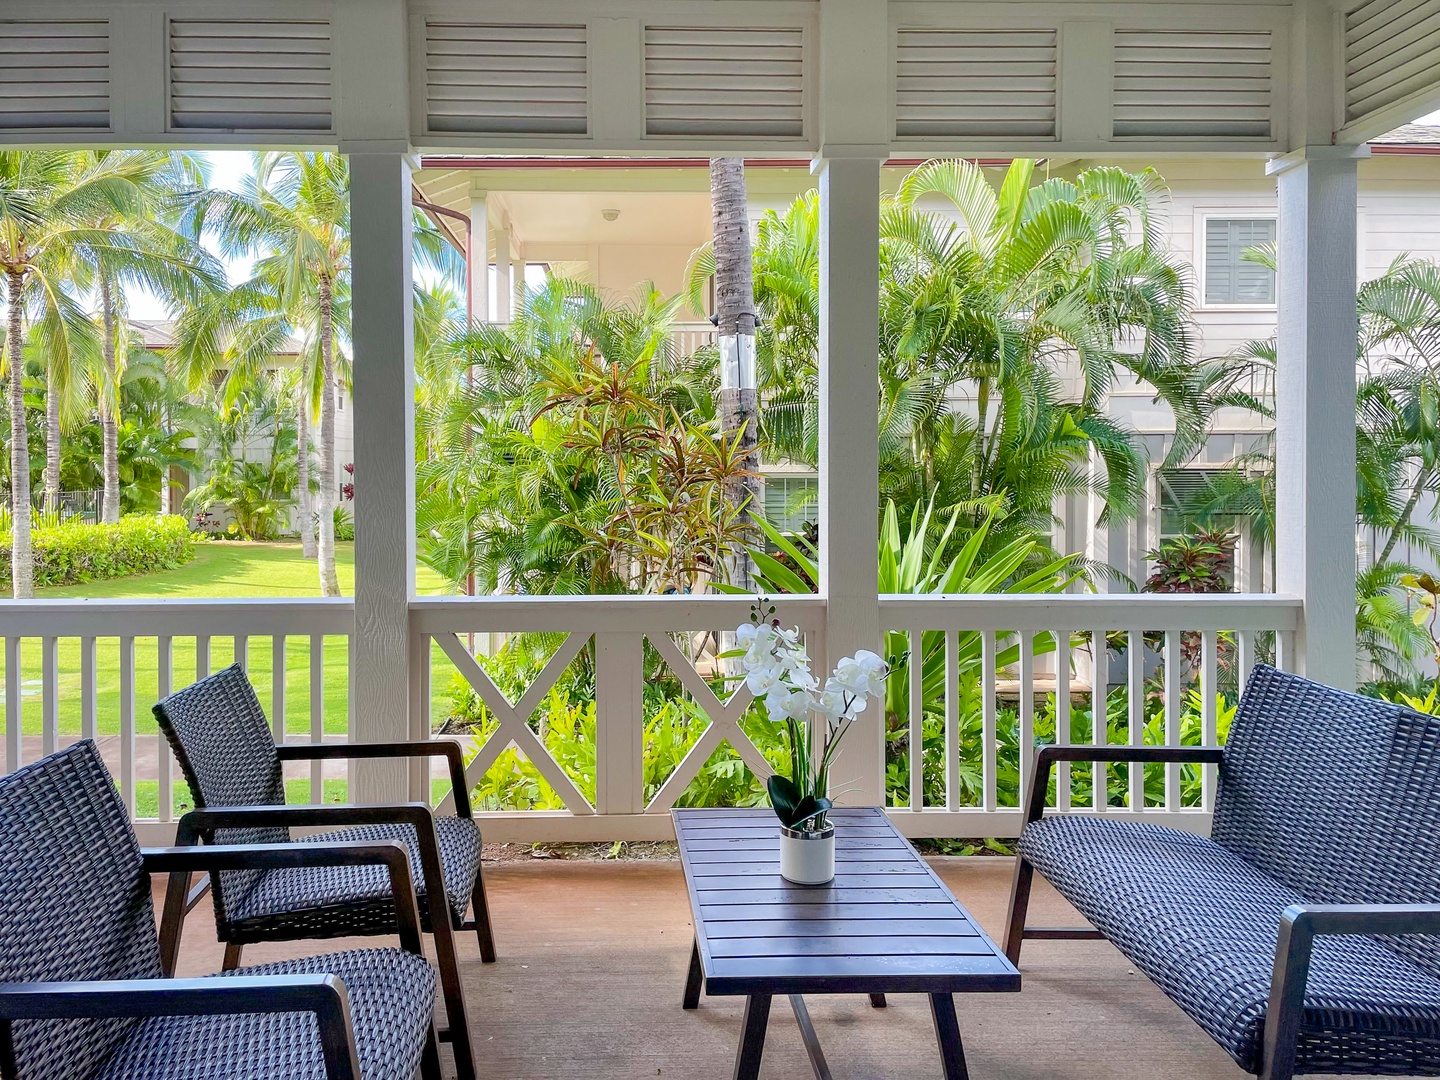 Kapolei Vacation Rentals, Coconut Plantation 1110-3 - The tranquil backyard where you can relax and dine on the lanai.